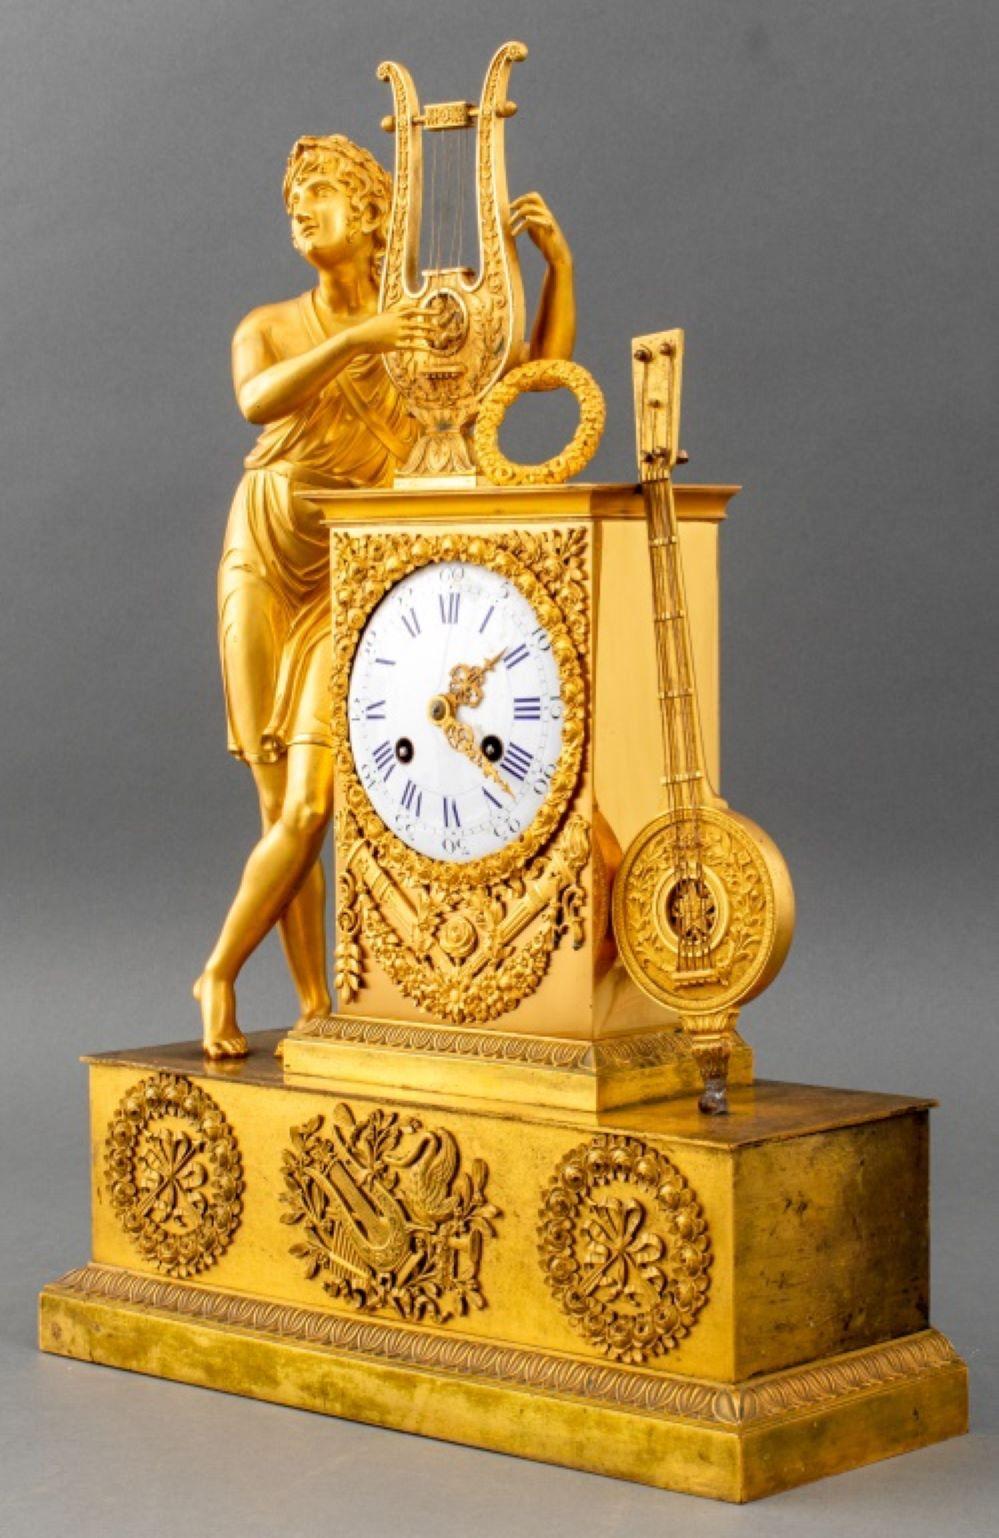 French Empire ormolu mantel clock, circa 1820, the case by Louis Stanislas Lenoir-Ravrio (French, 1783-1846), and depicting Apollo with his lyre by an altar, the dial with Roman numerals apparently unsigned, the later movement circa 1880 and signed